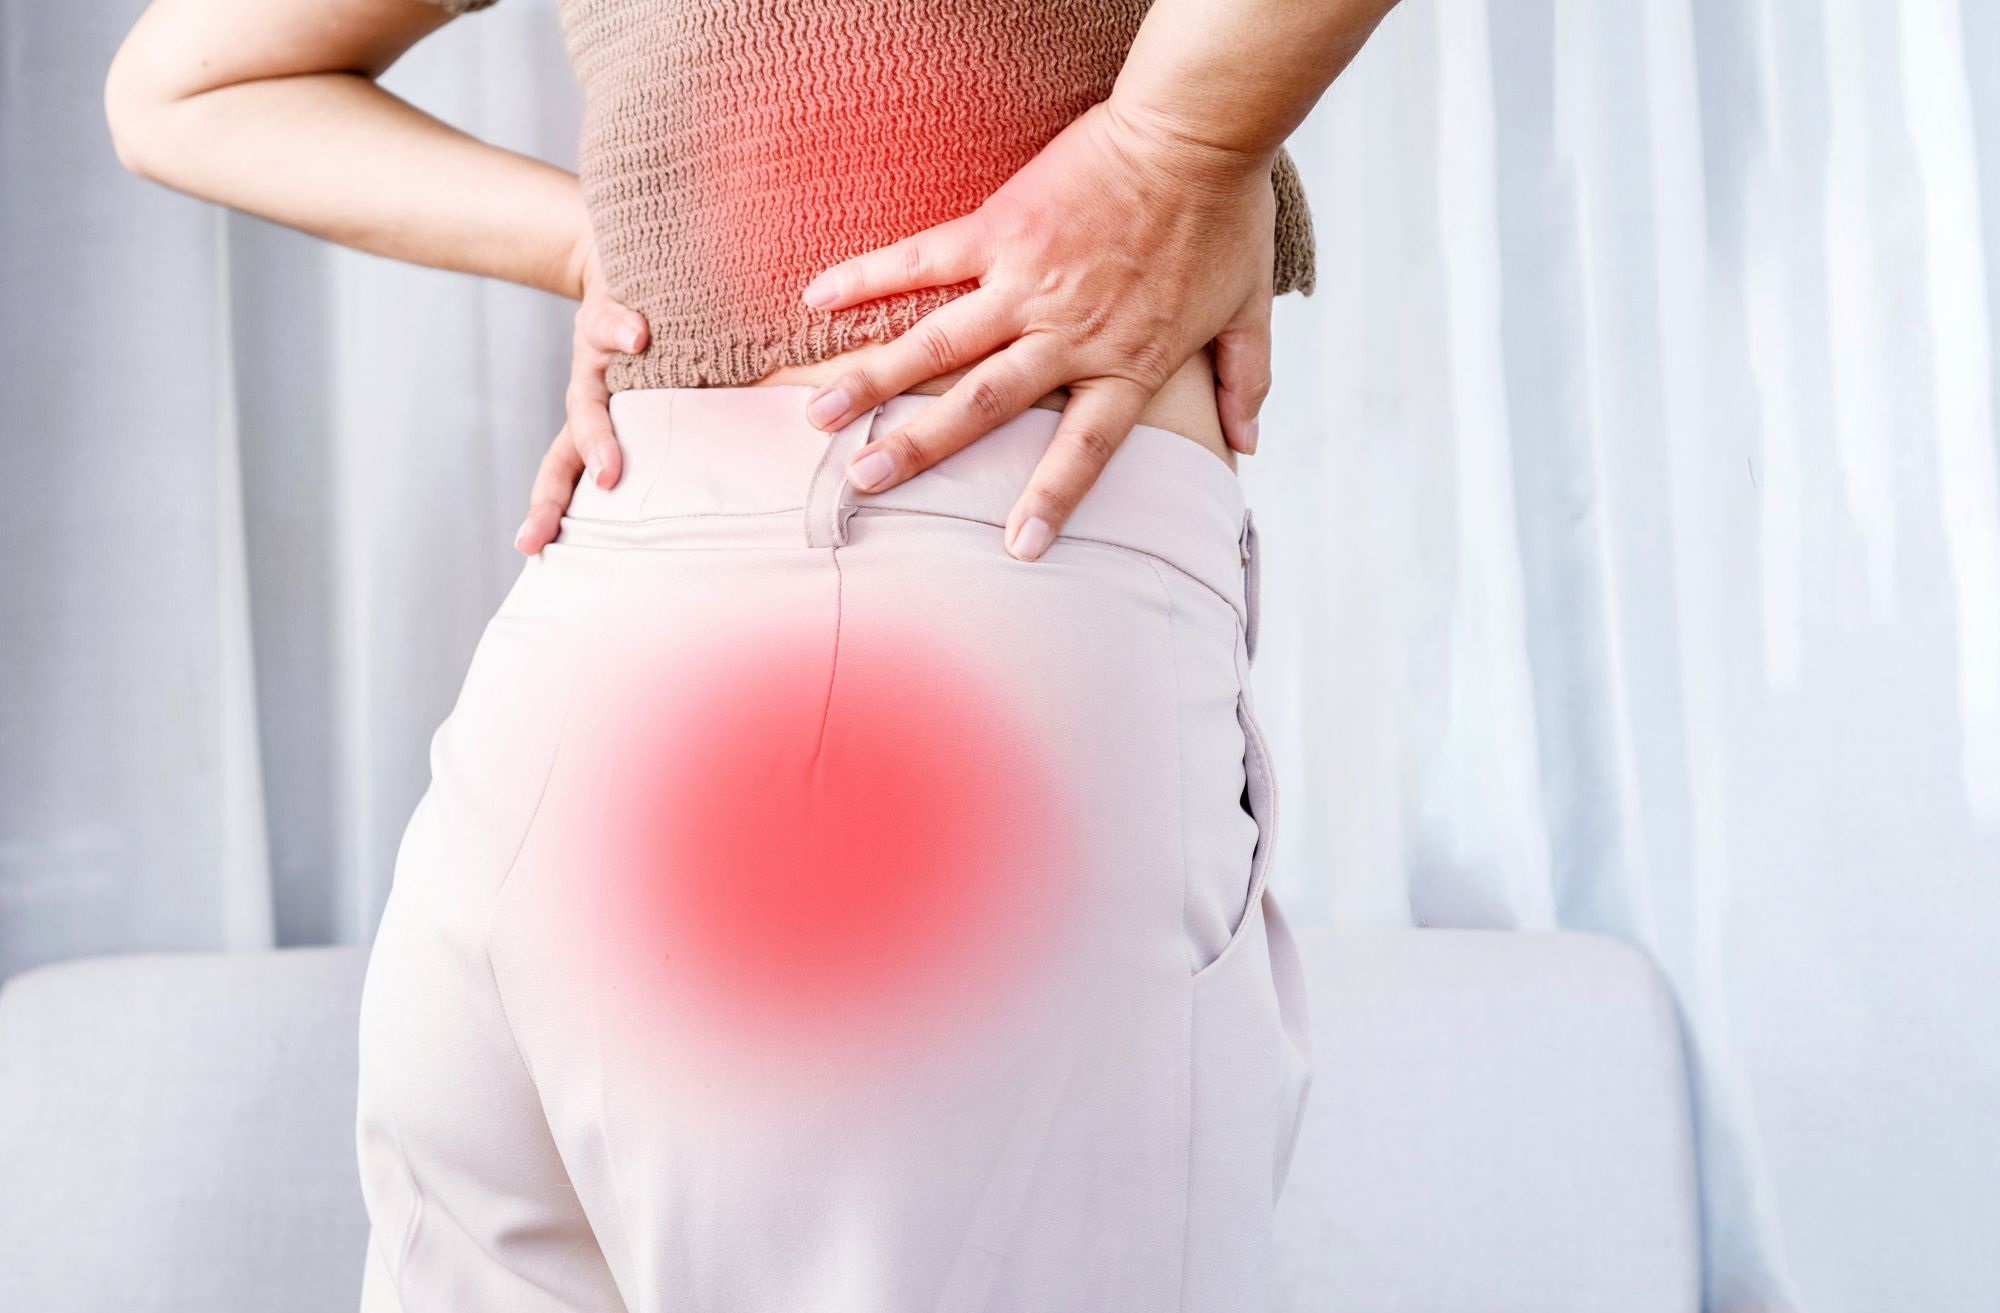 The Signs Of Sciatica Improving You Will See After Doing These Stretches